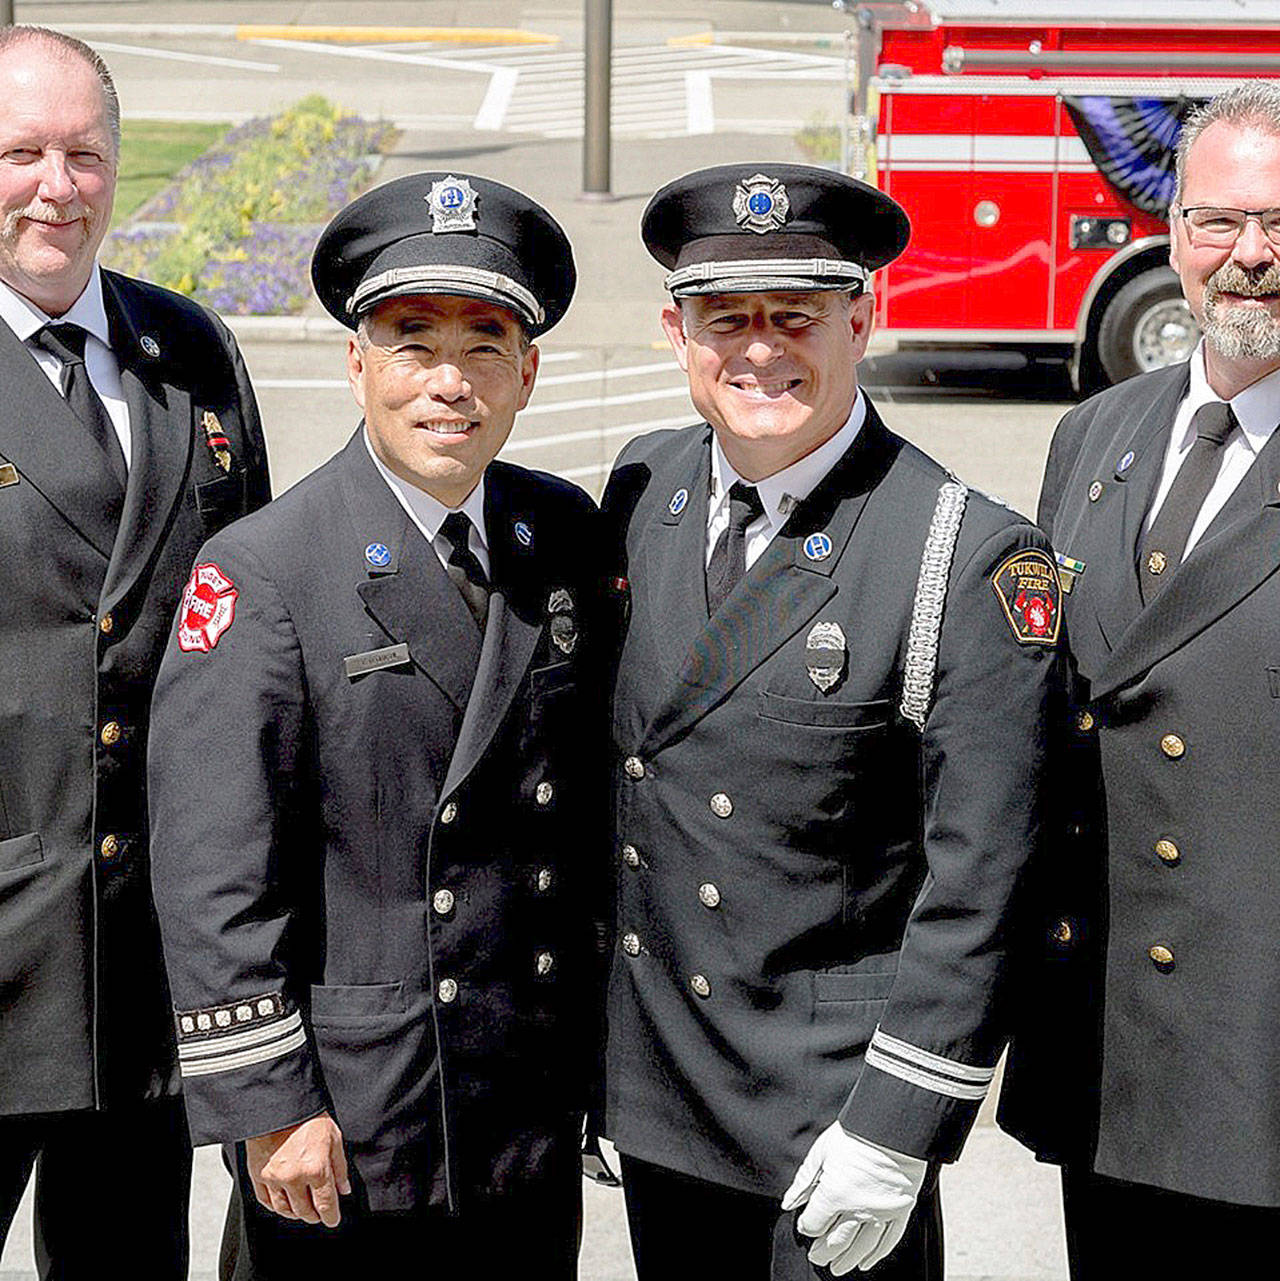 Kyle Ohashi, second from the left, will retire at the end of June after 15 years as the Puget Sound Regional Fire Authority public information officer and 30 years with the department. COURTESY PHOTO